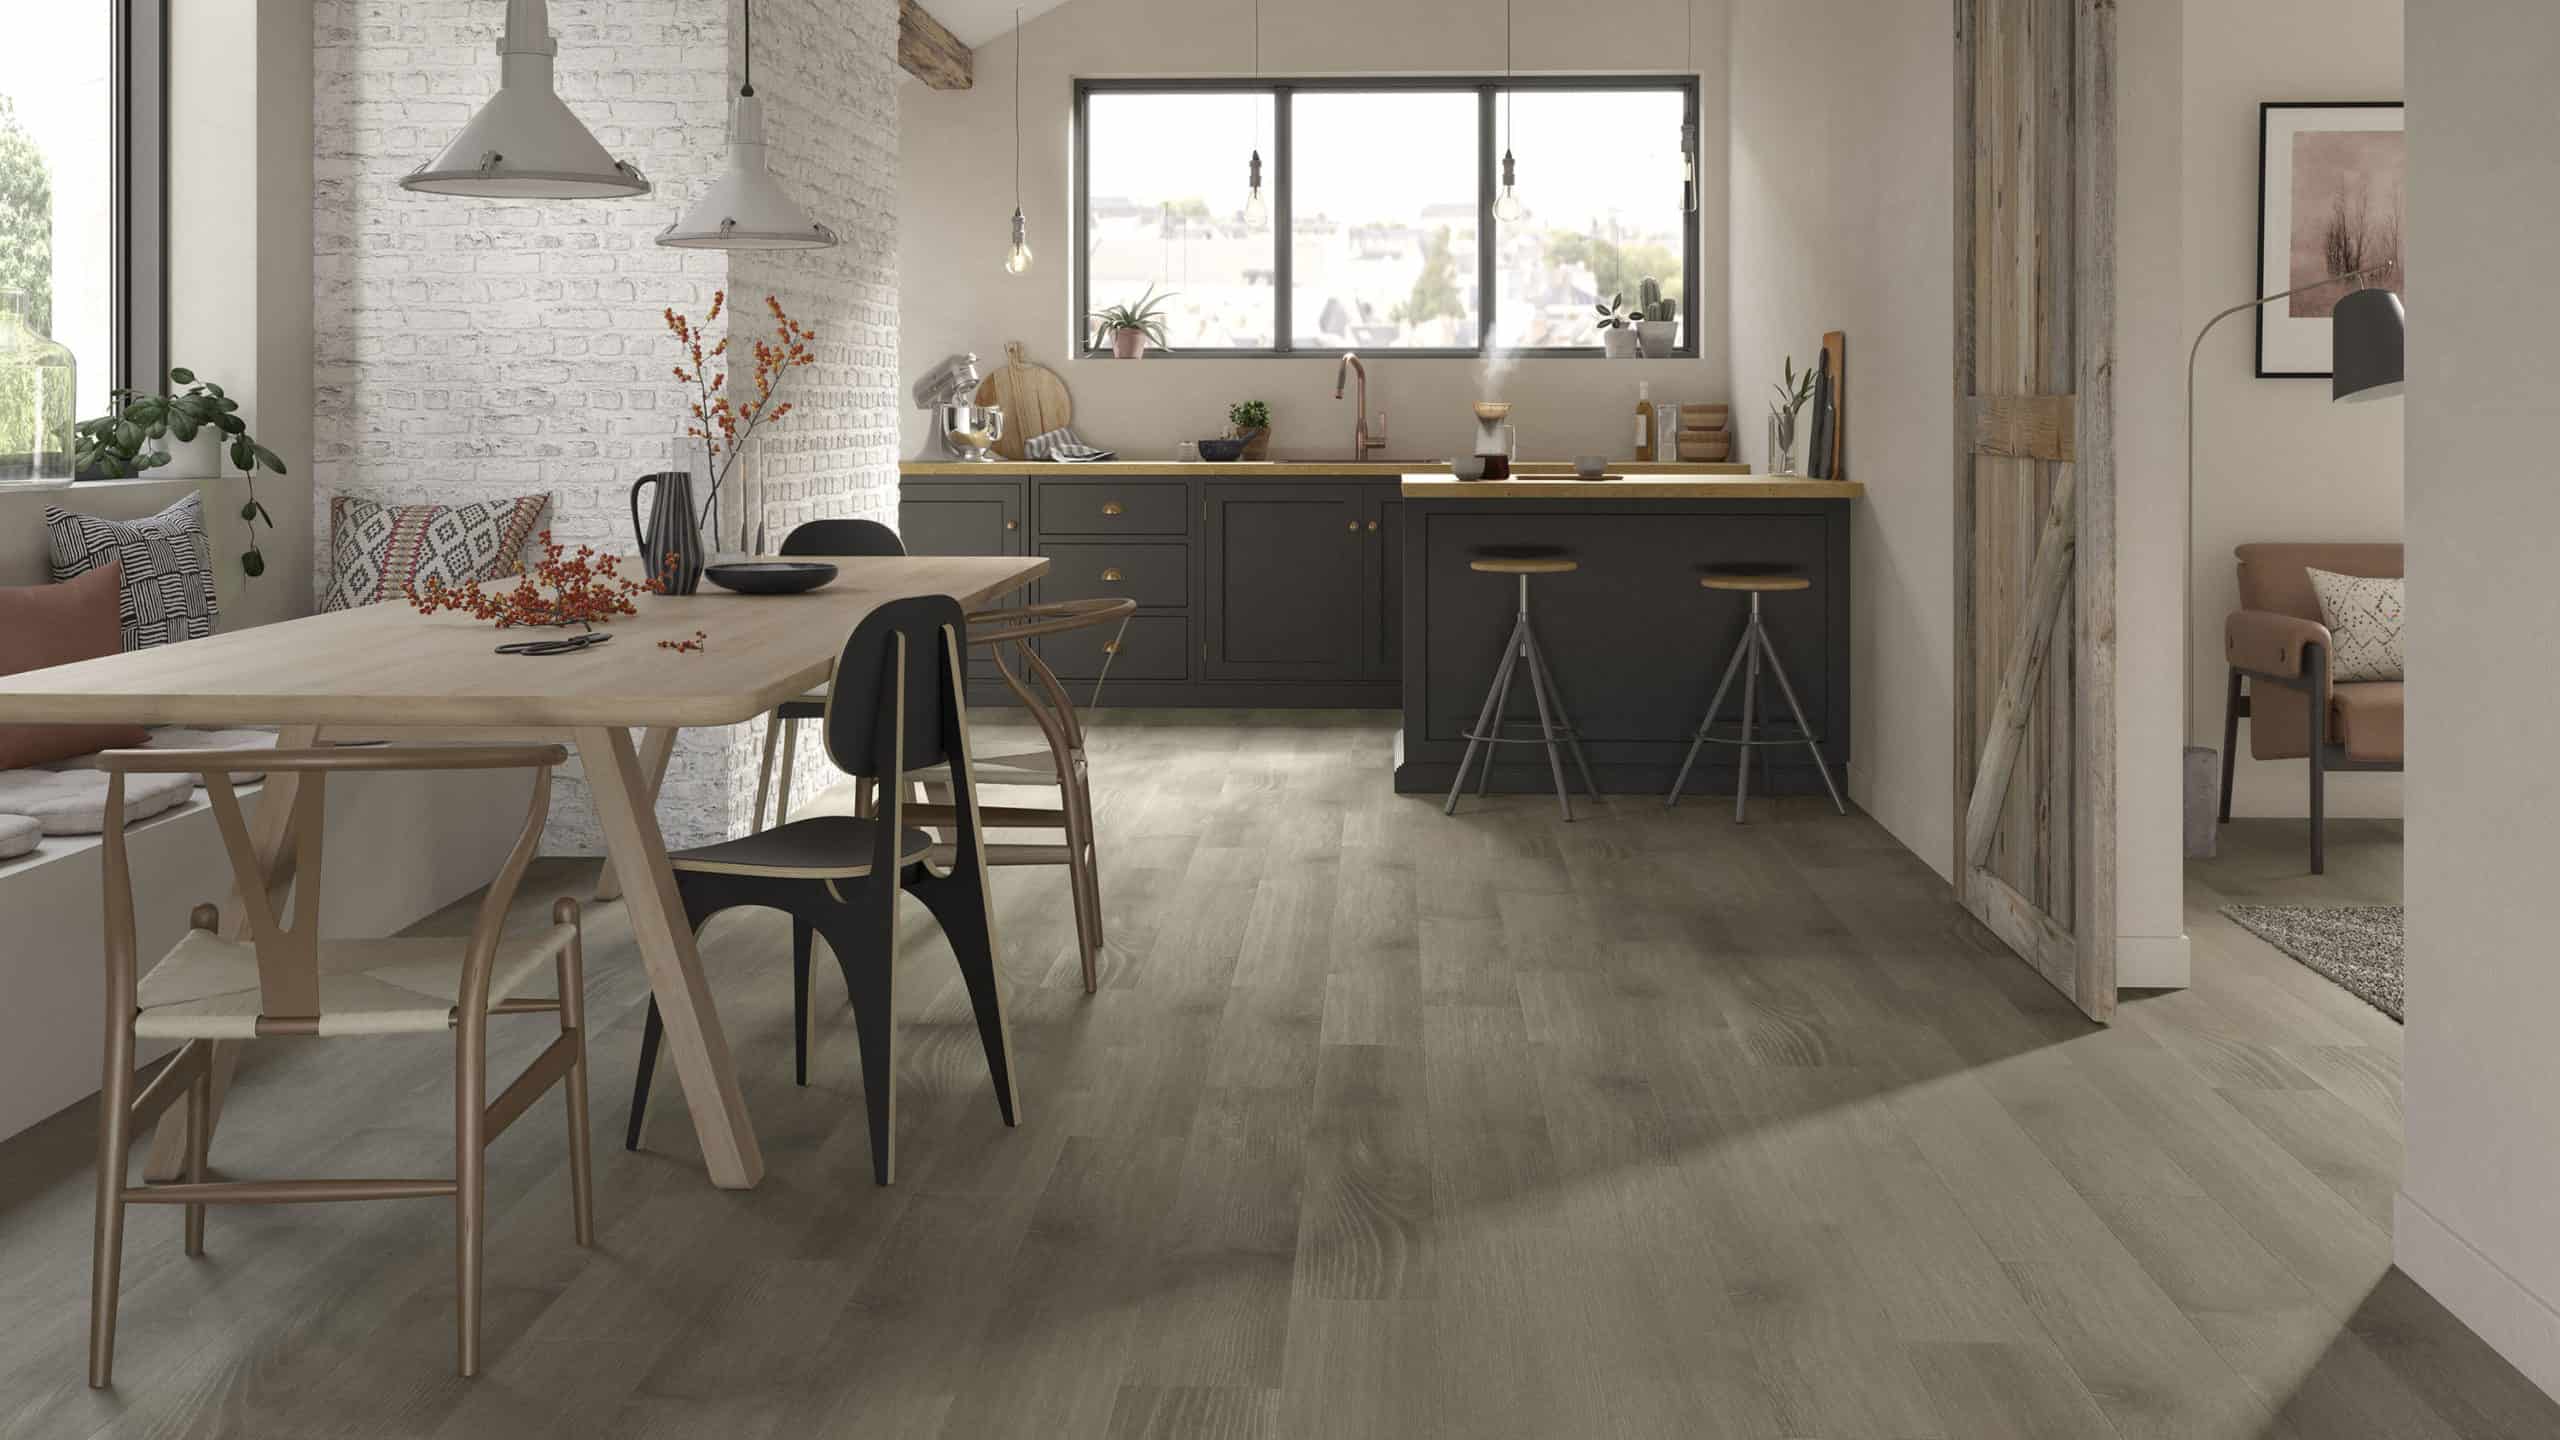 IN LVT StarfloorClickUltimate30 Galloway paysage courbe